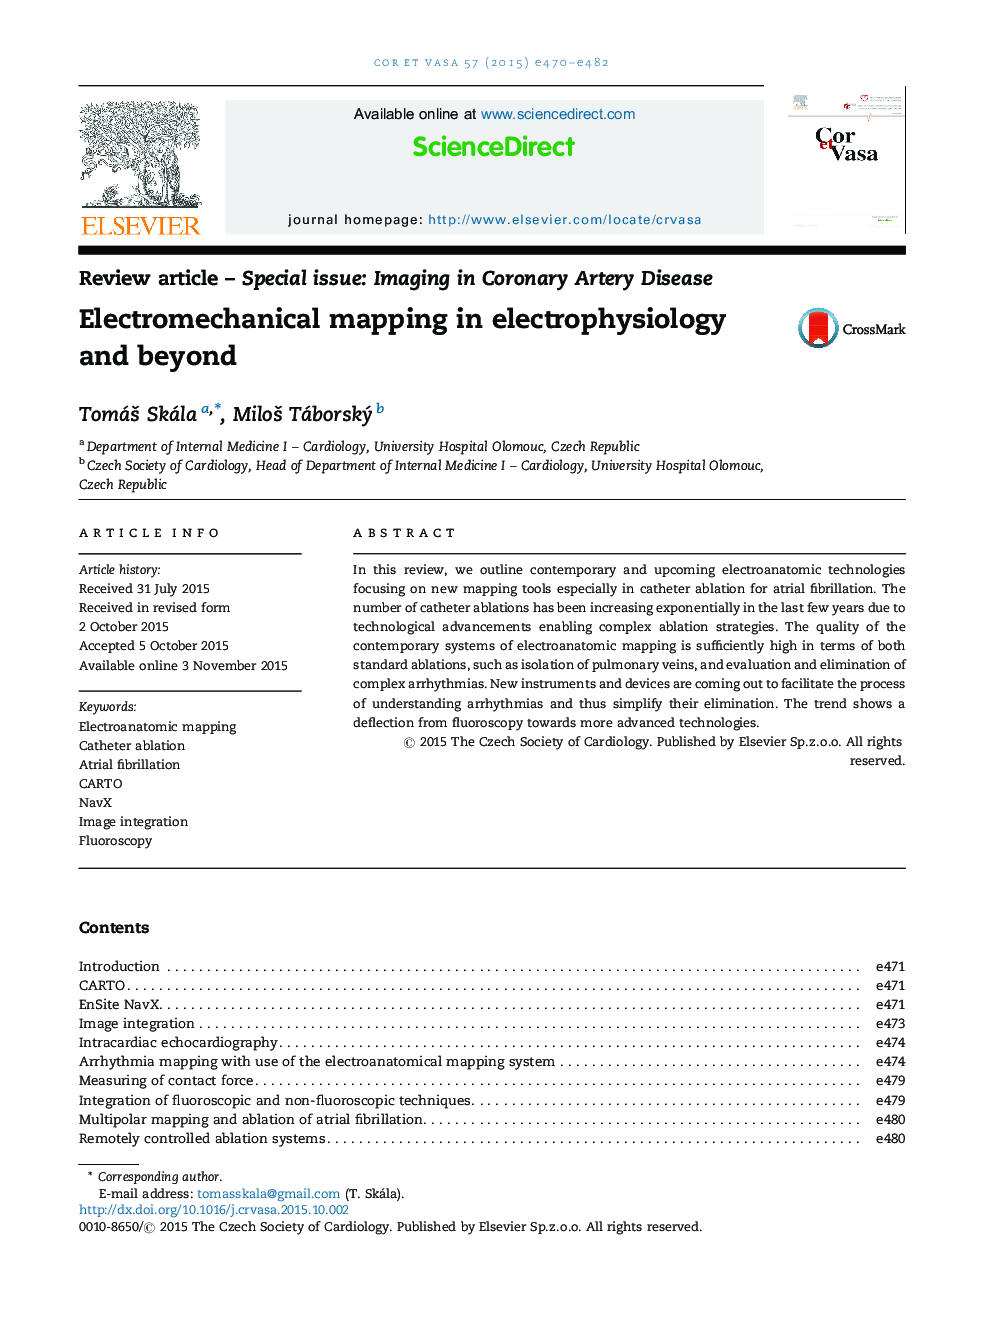 Electromechanical mapping in electrophysiology and beyond